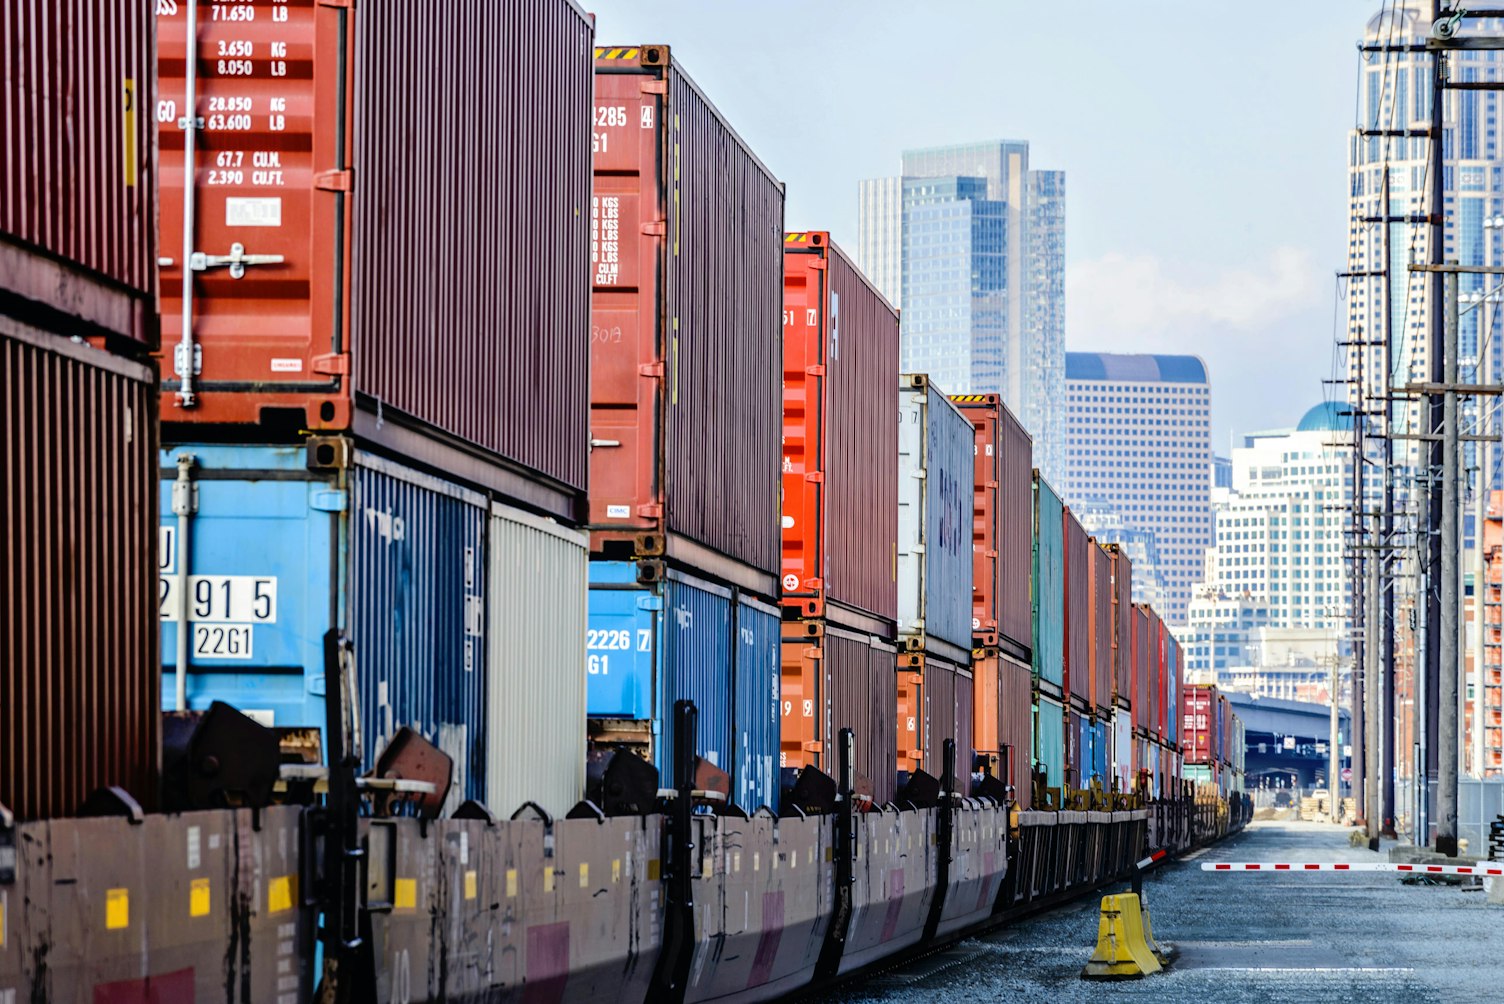 Freight Train with Cargo Containers